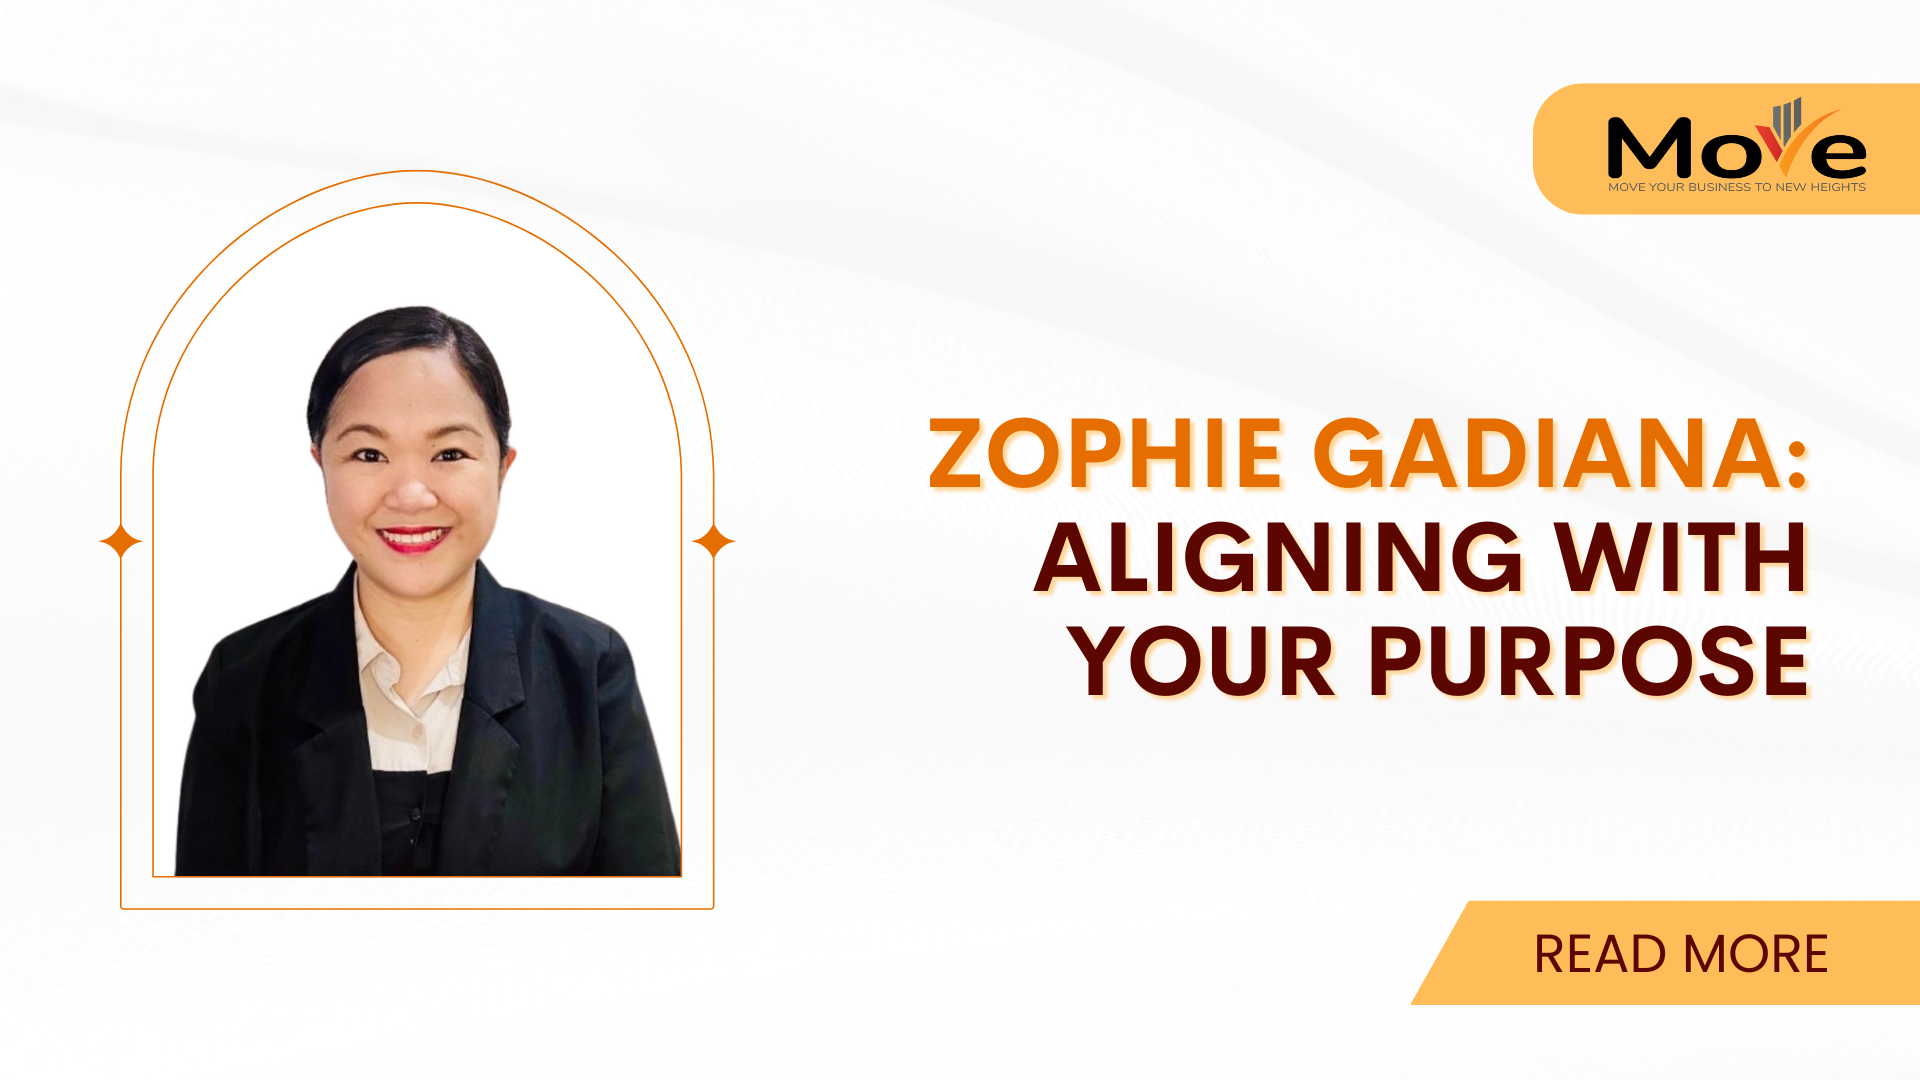 Zophie Gadiana Aligning With Your Purpose